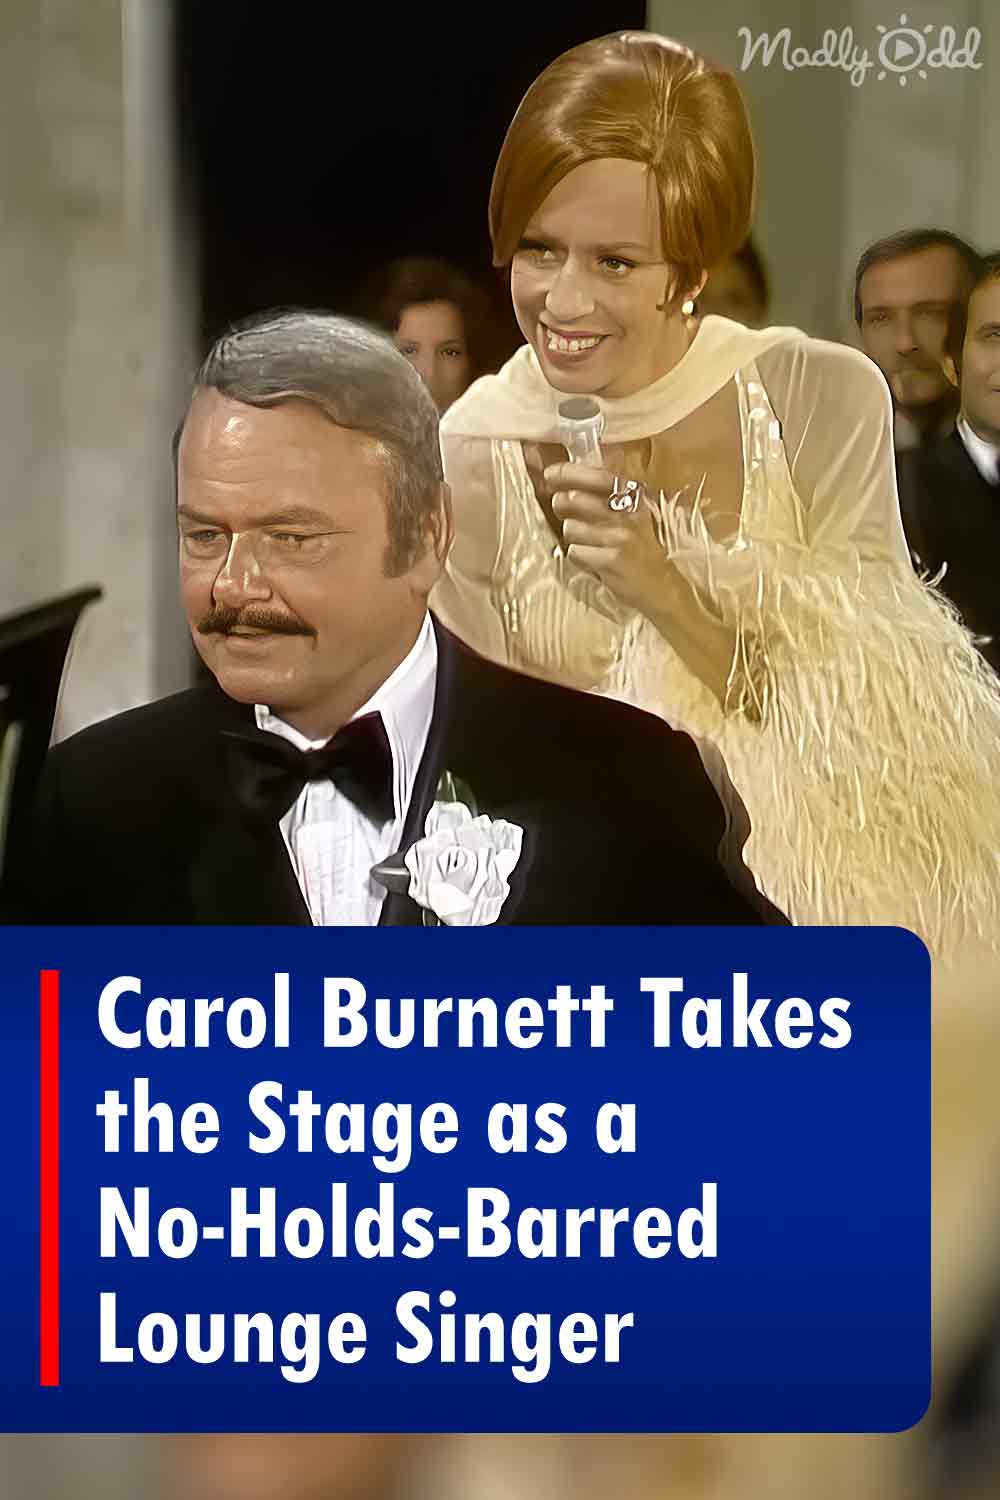 Carol Burnett Takes the Stage as a No-Holds-Barred Lounge Singer